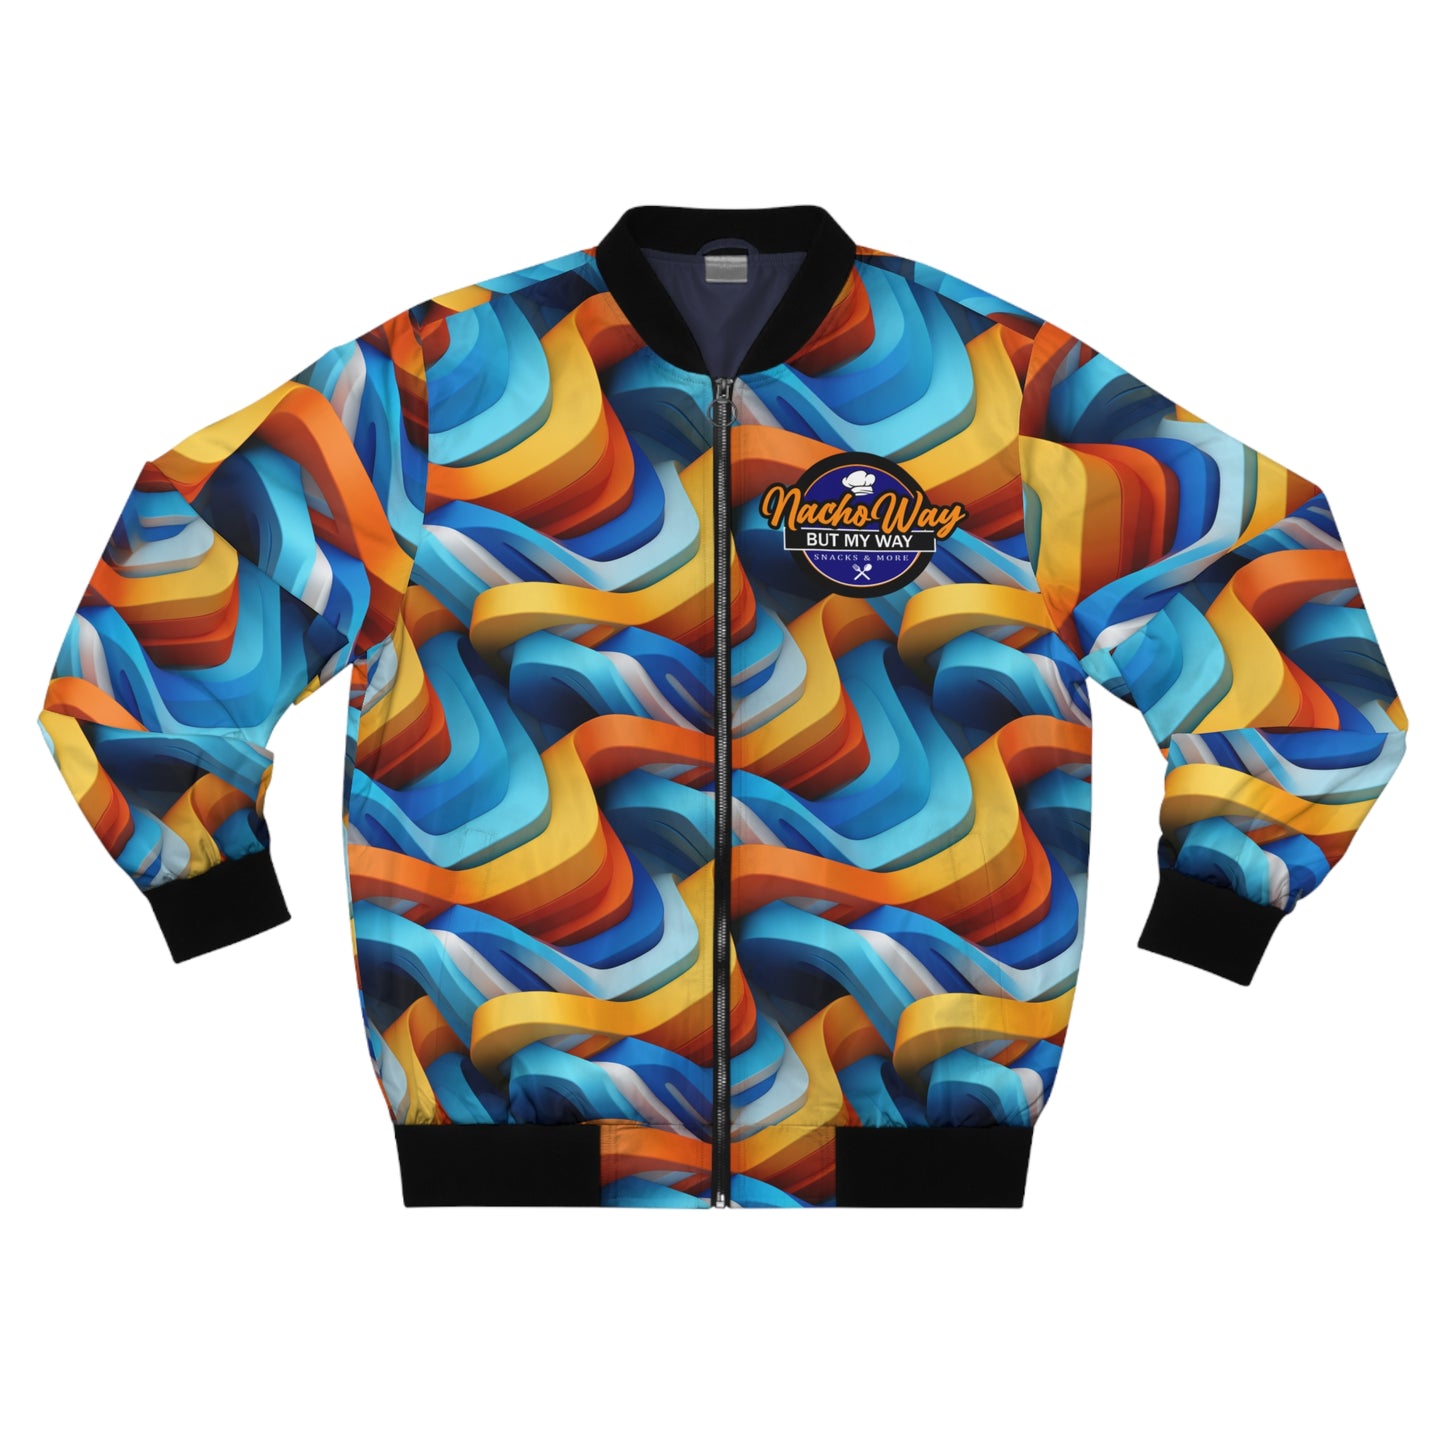 NachoWay “Go With The Flow” Bomber Jacket